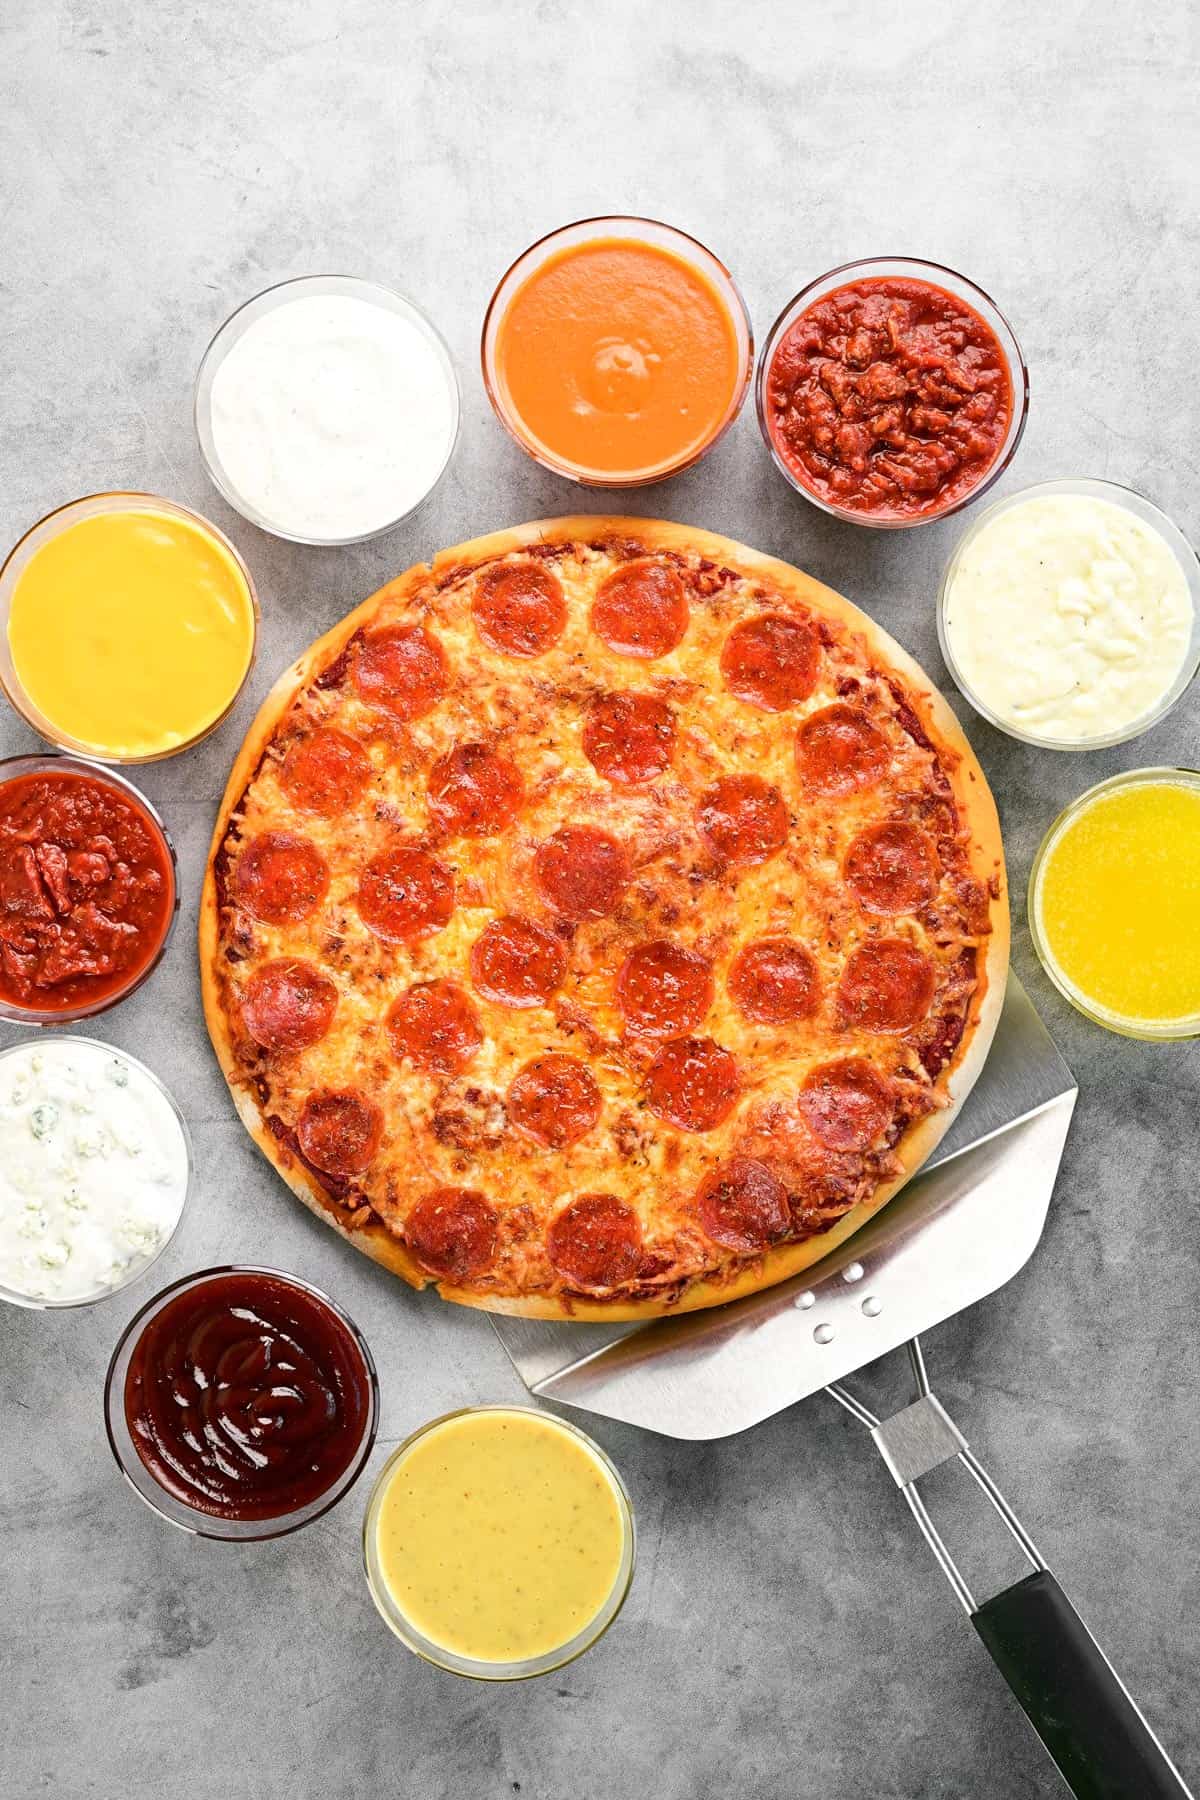 A pizza on a pizza peel with bowls of various dipping sauces around it.